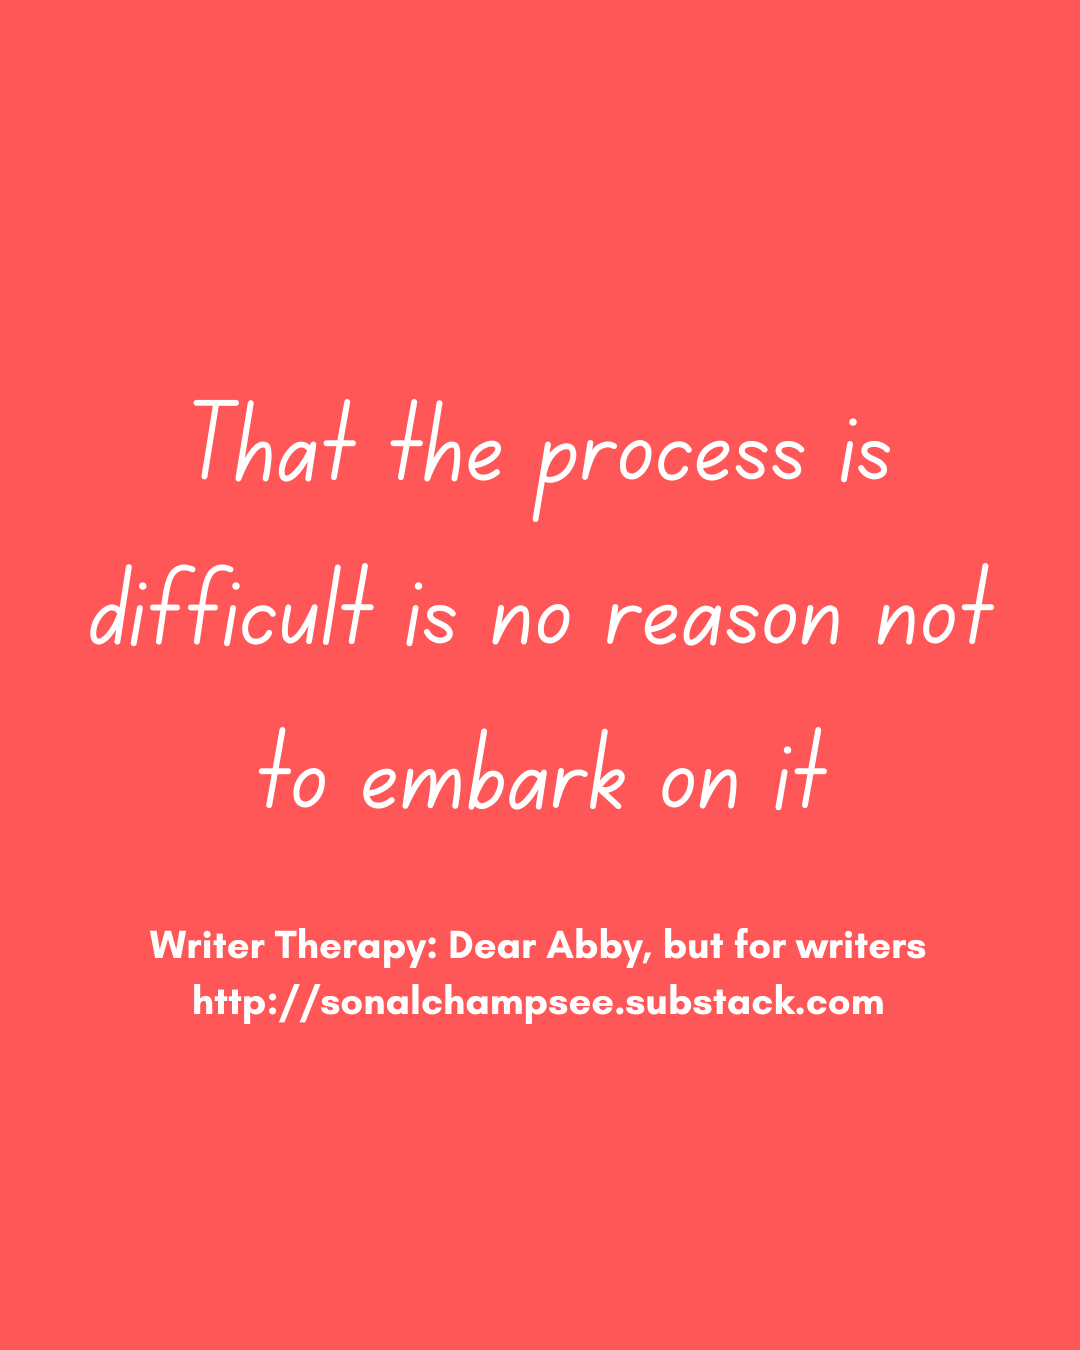 That the process is difficult is no reason not to embark on it. Writer Therapy: Dear Abby, but for writers. http://sonalchampsee.substack.com